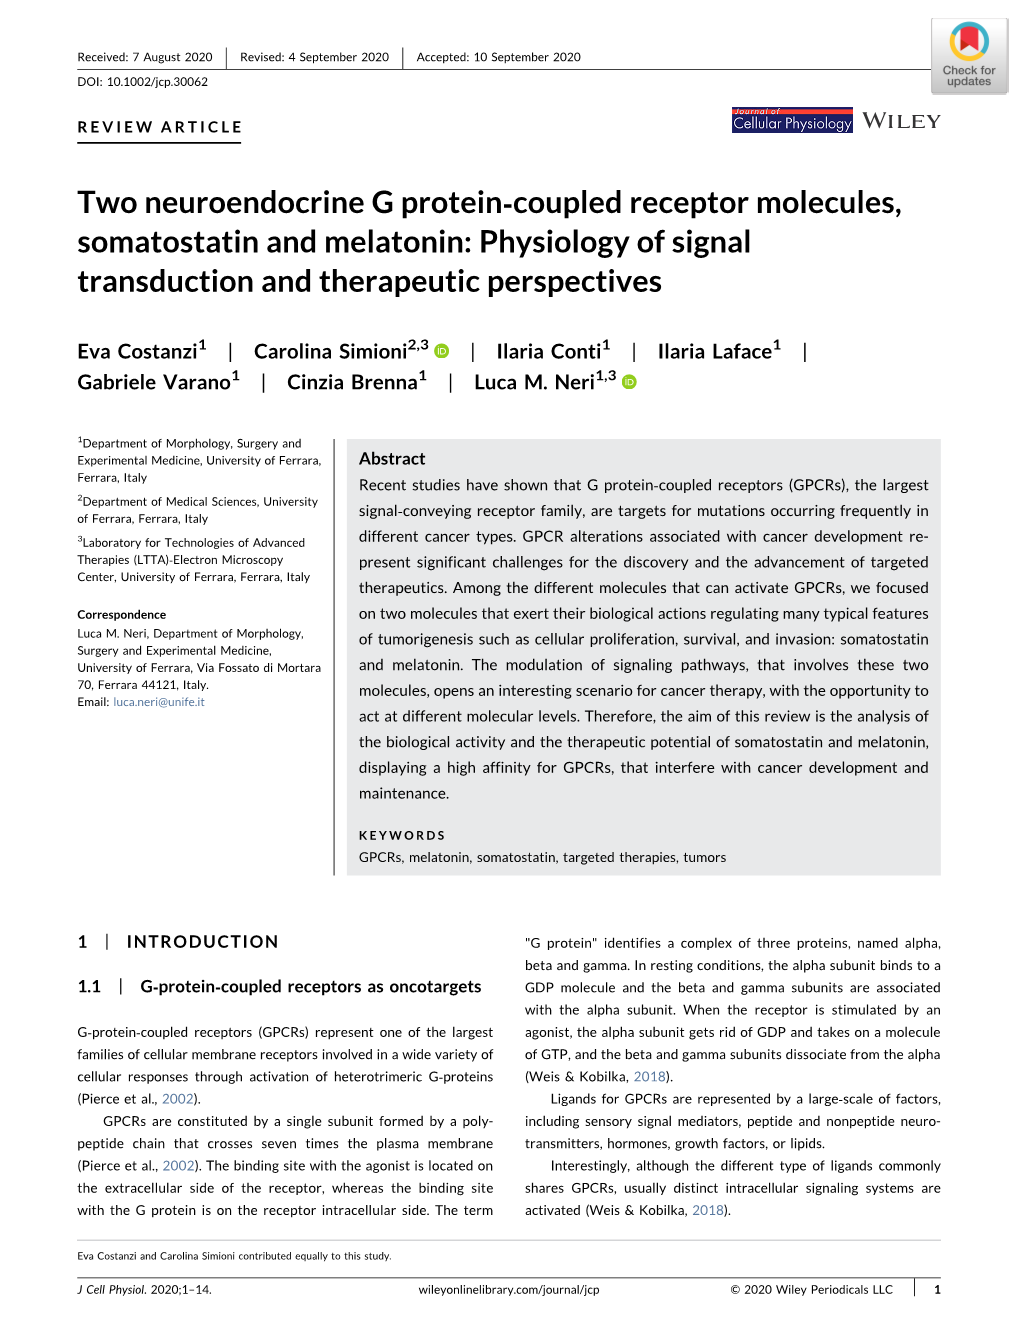 Two Neuroendocrine G Protein‐Coupled Receptor Molecules, Somatostatin and Melatonin: Physiology of Signal Transduction and Therapeutic Perspectives